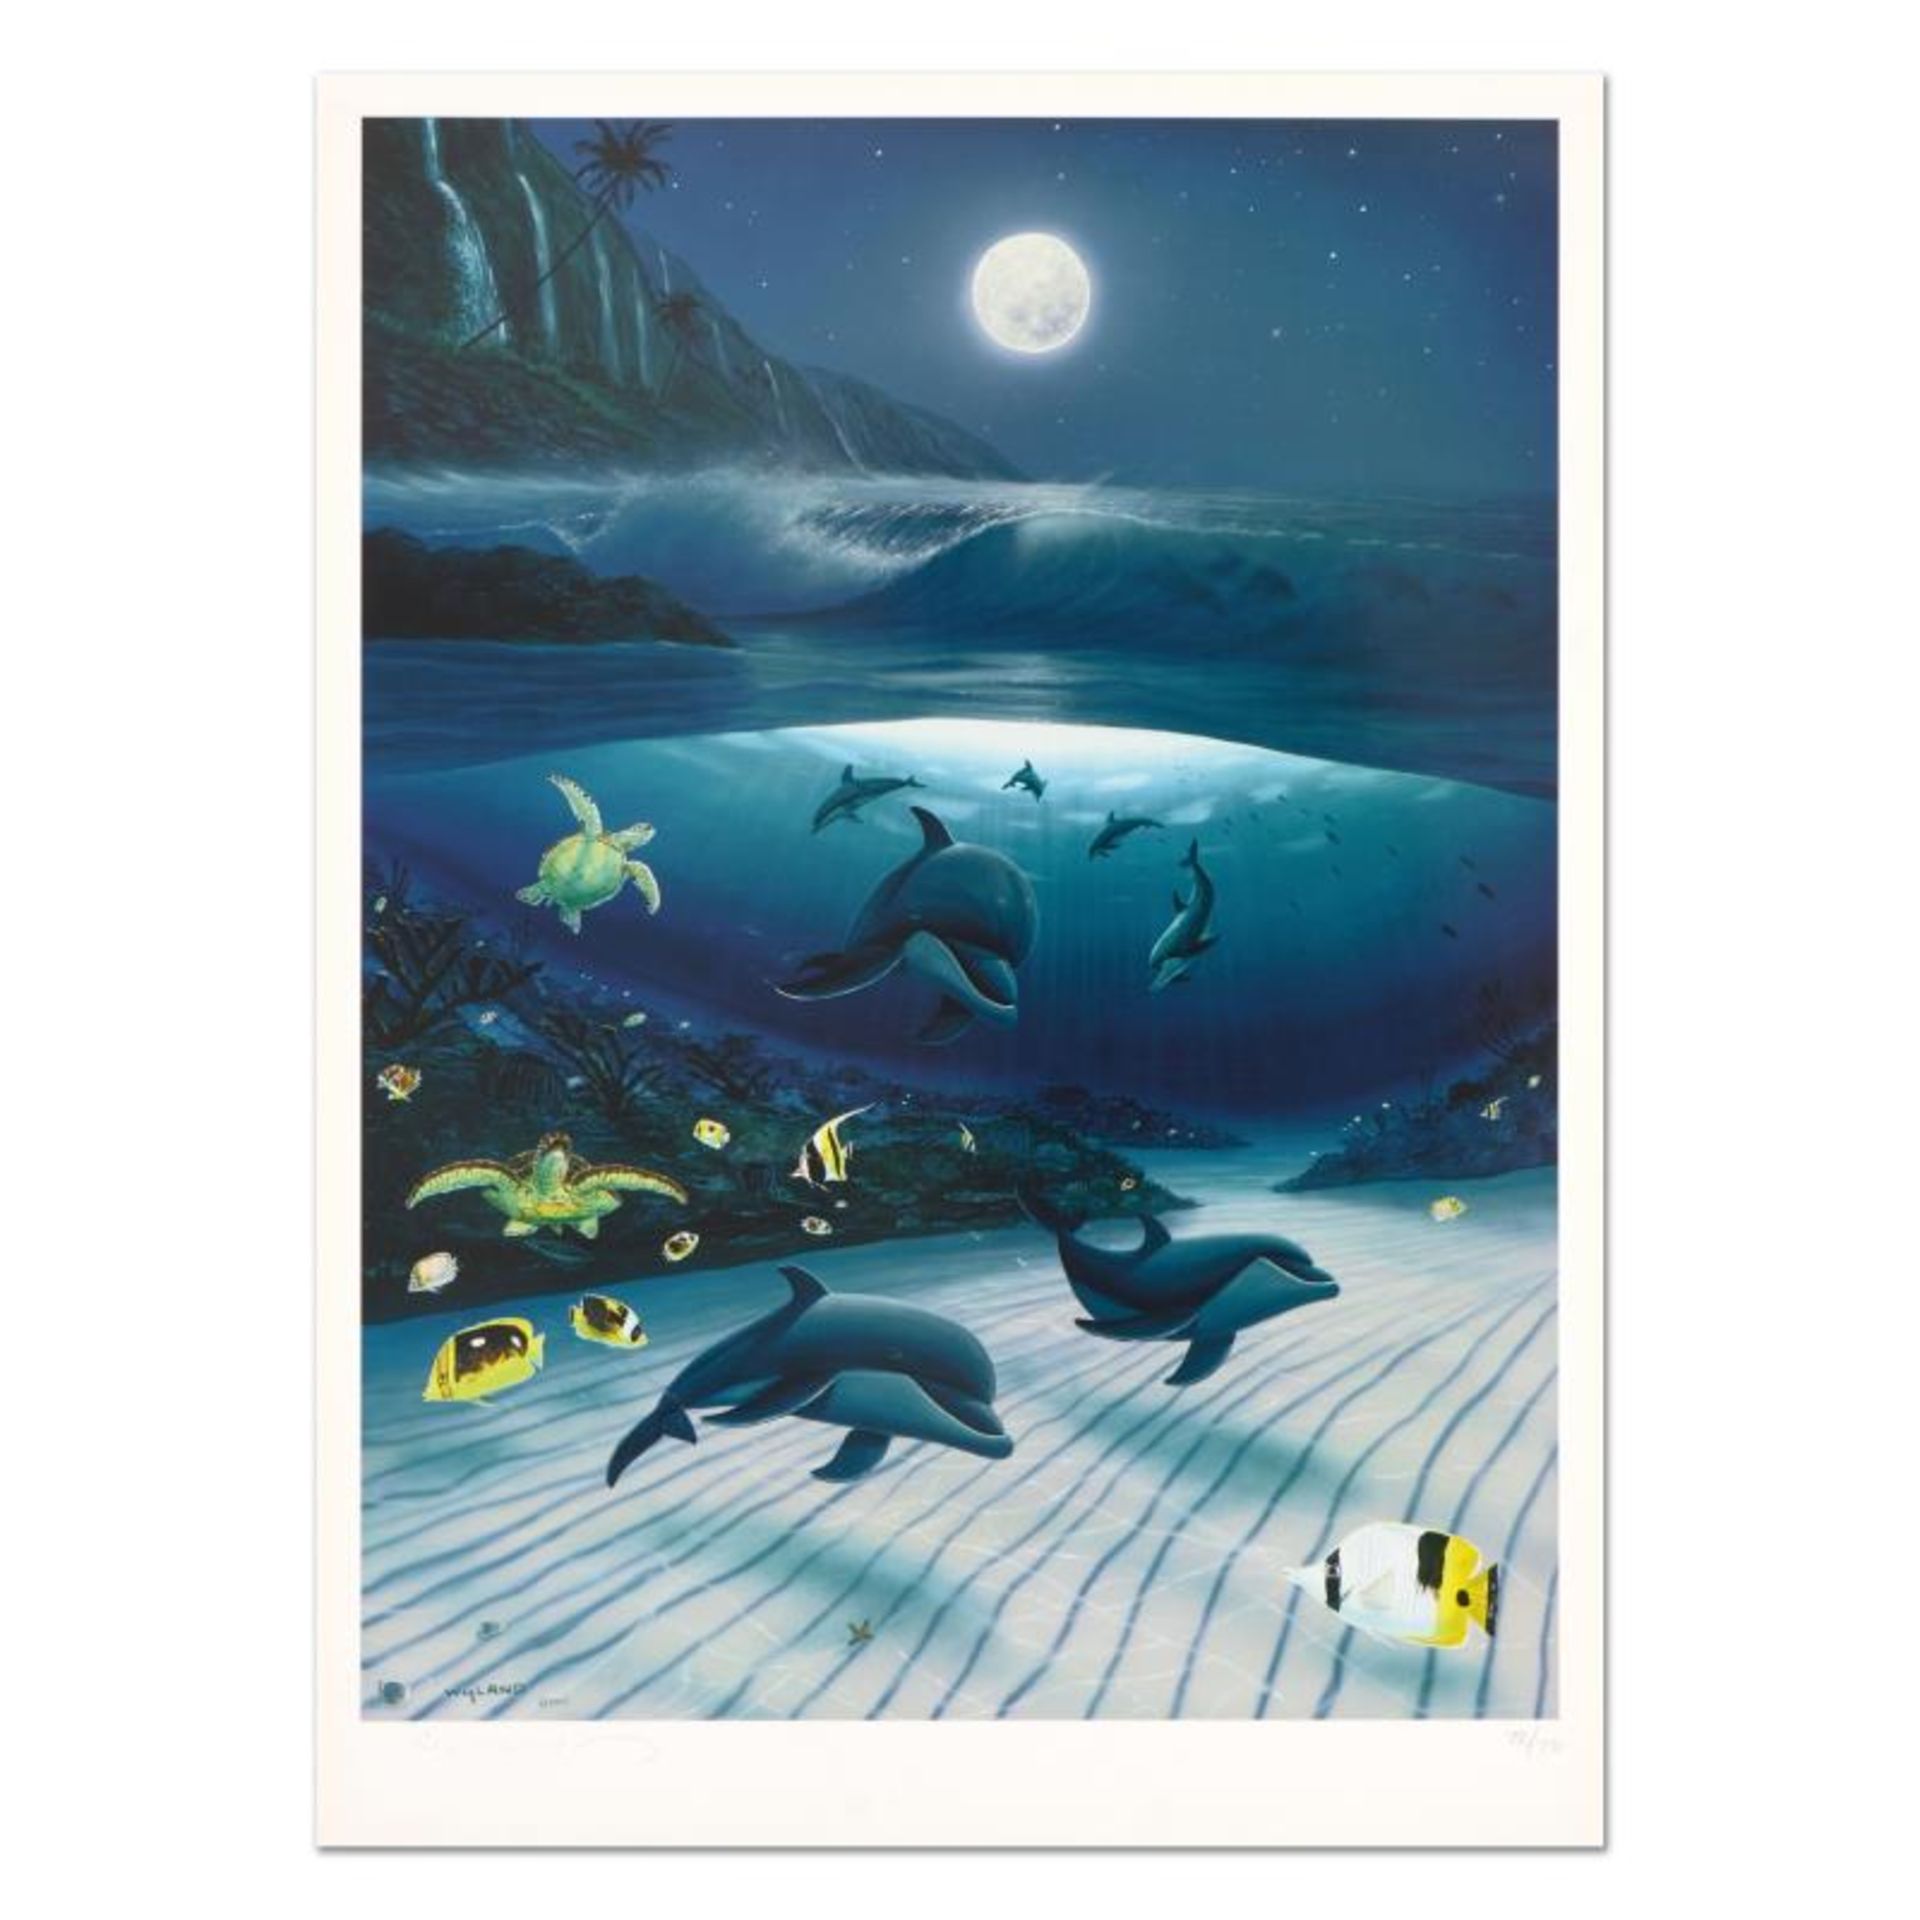 Wyland, "Mystical Waters" Limited Edition Lithograph, Numbered and Hand Signed w